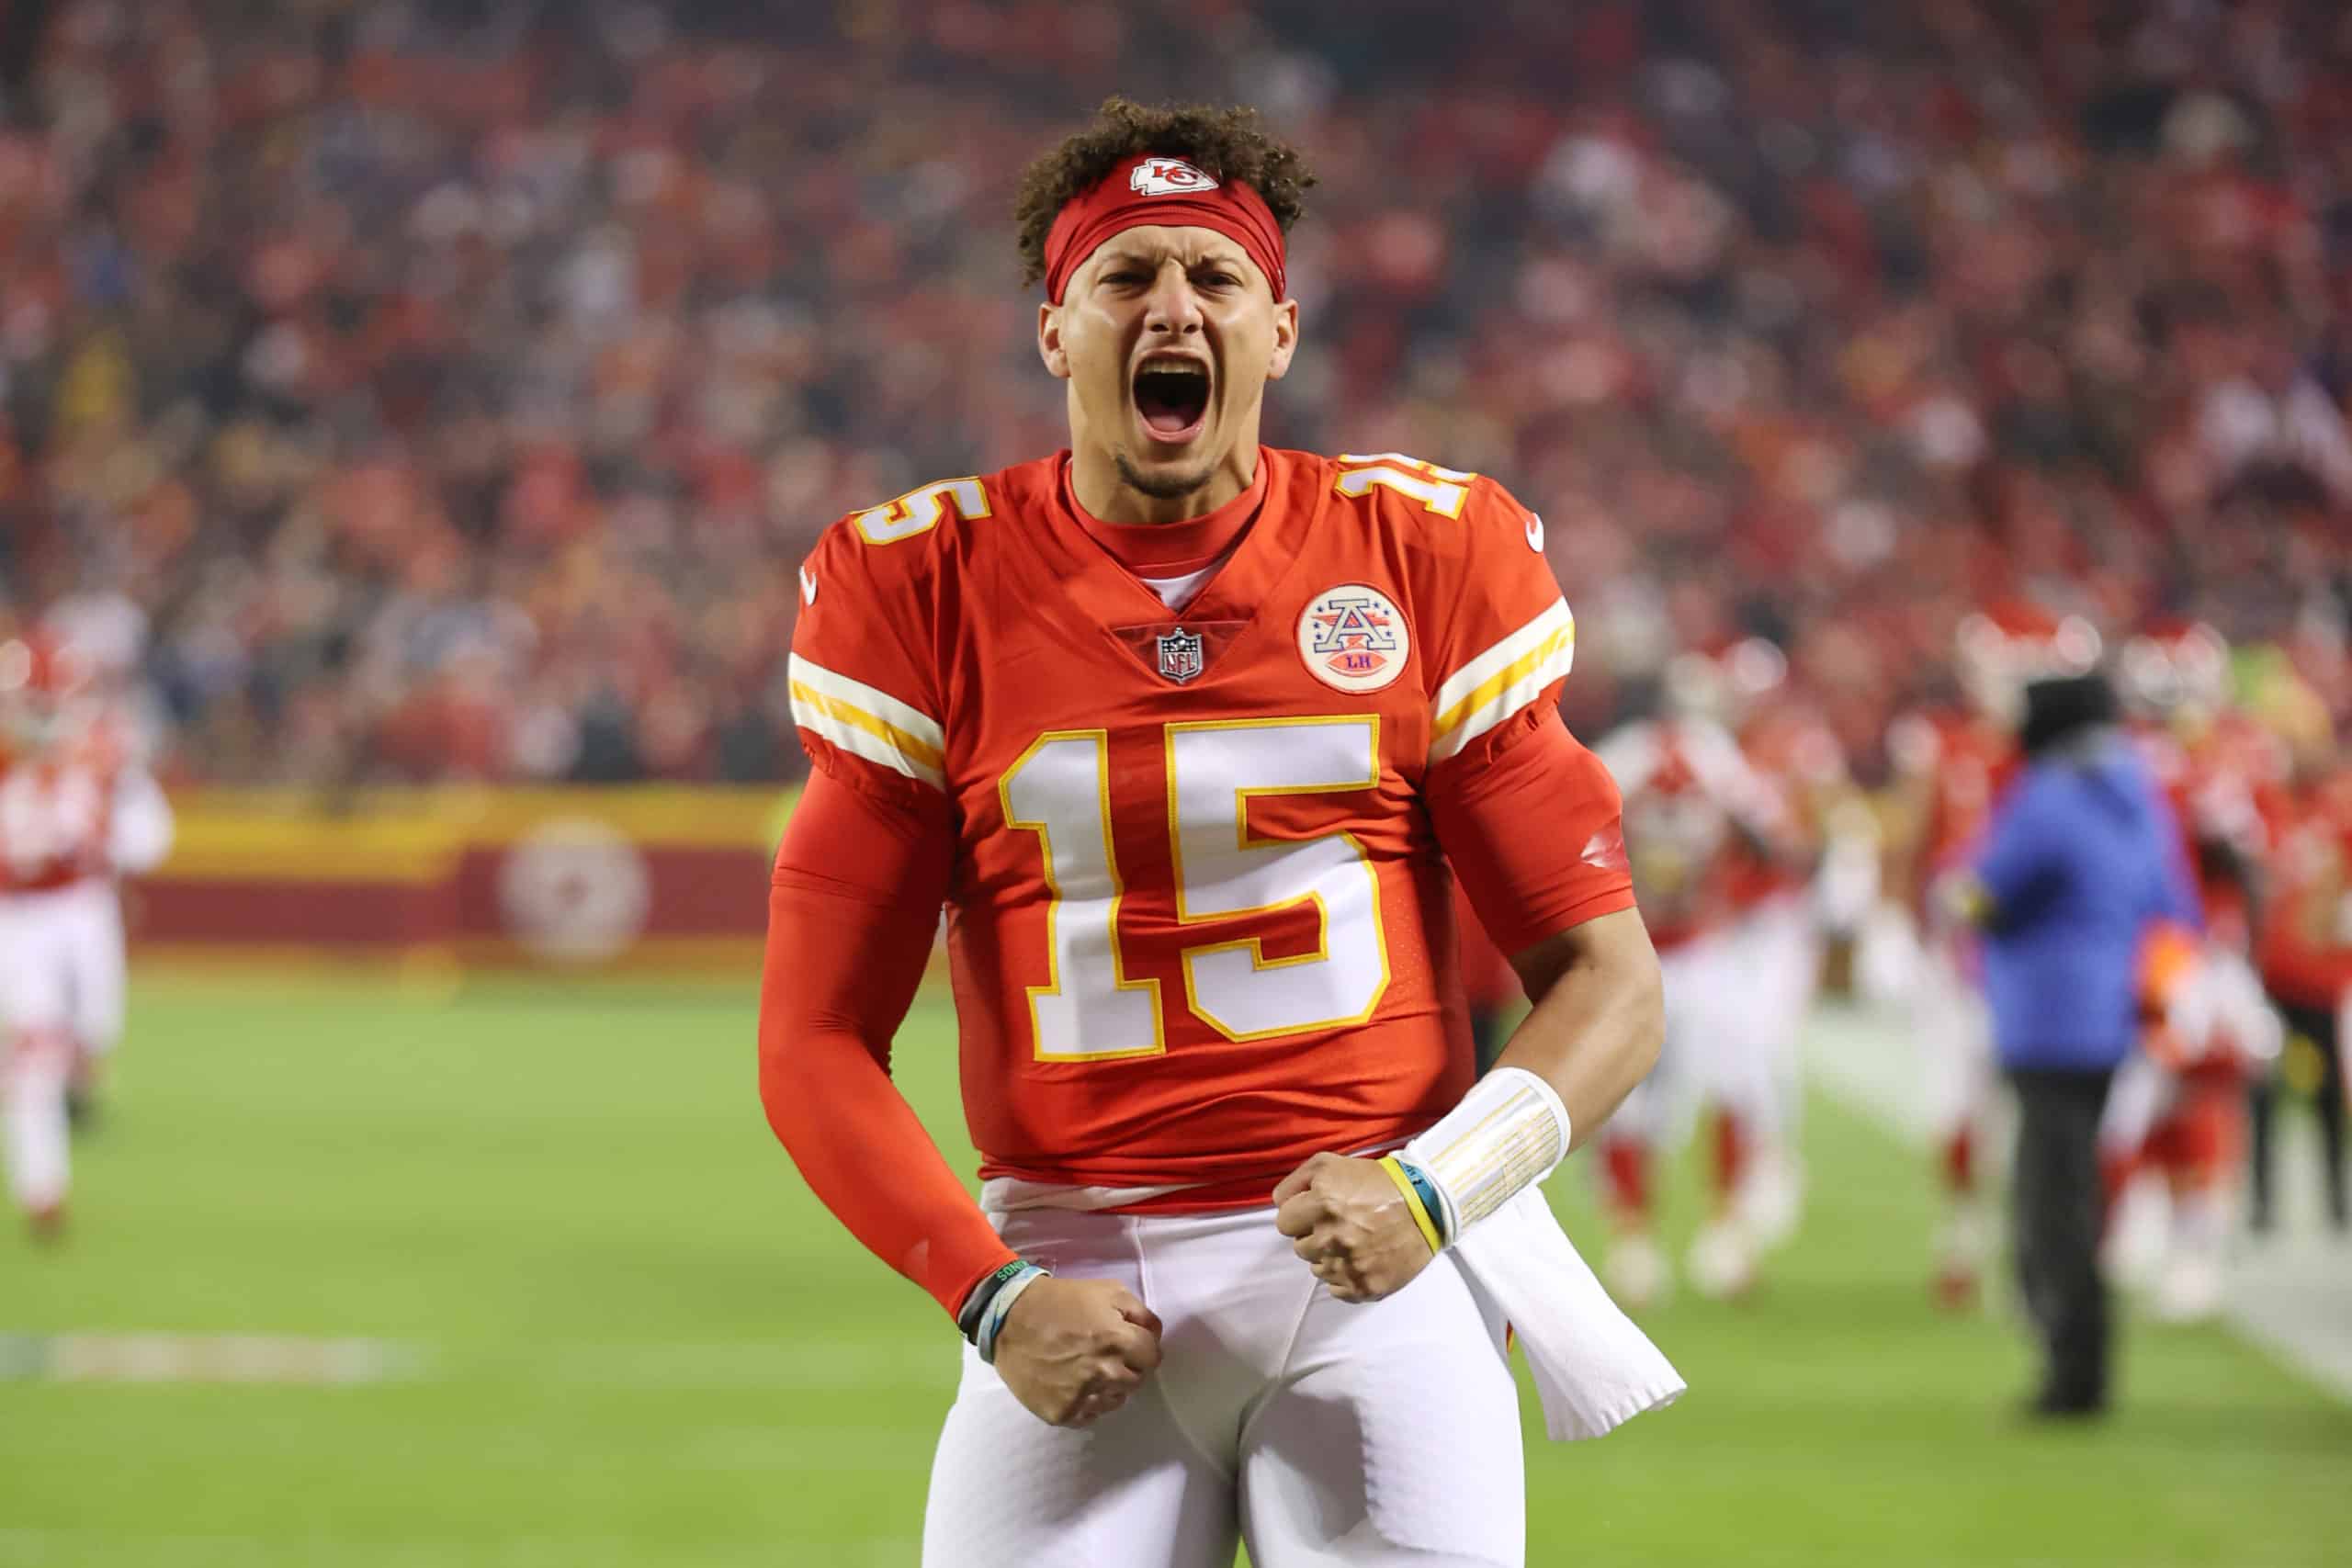 Will Patrick Mahomes reach new heights in 2022?